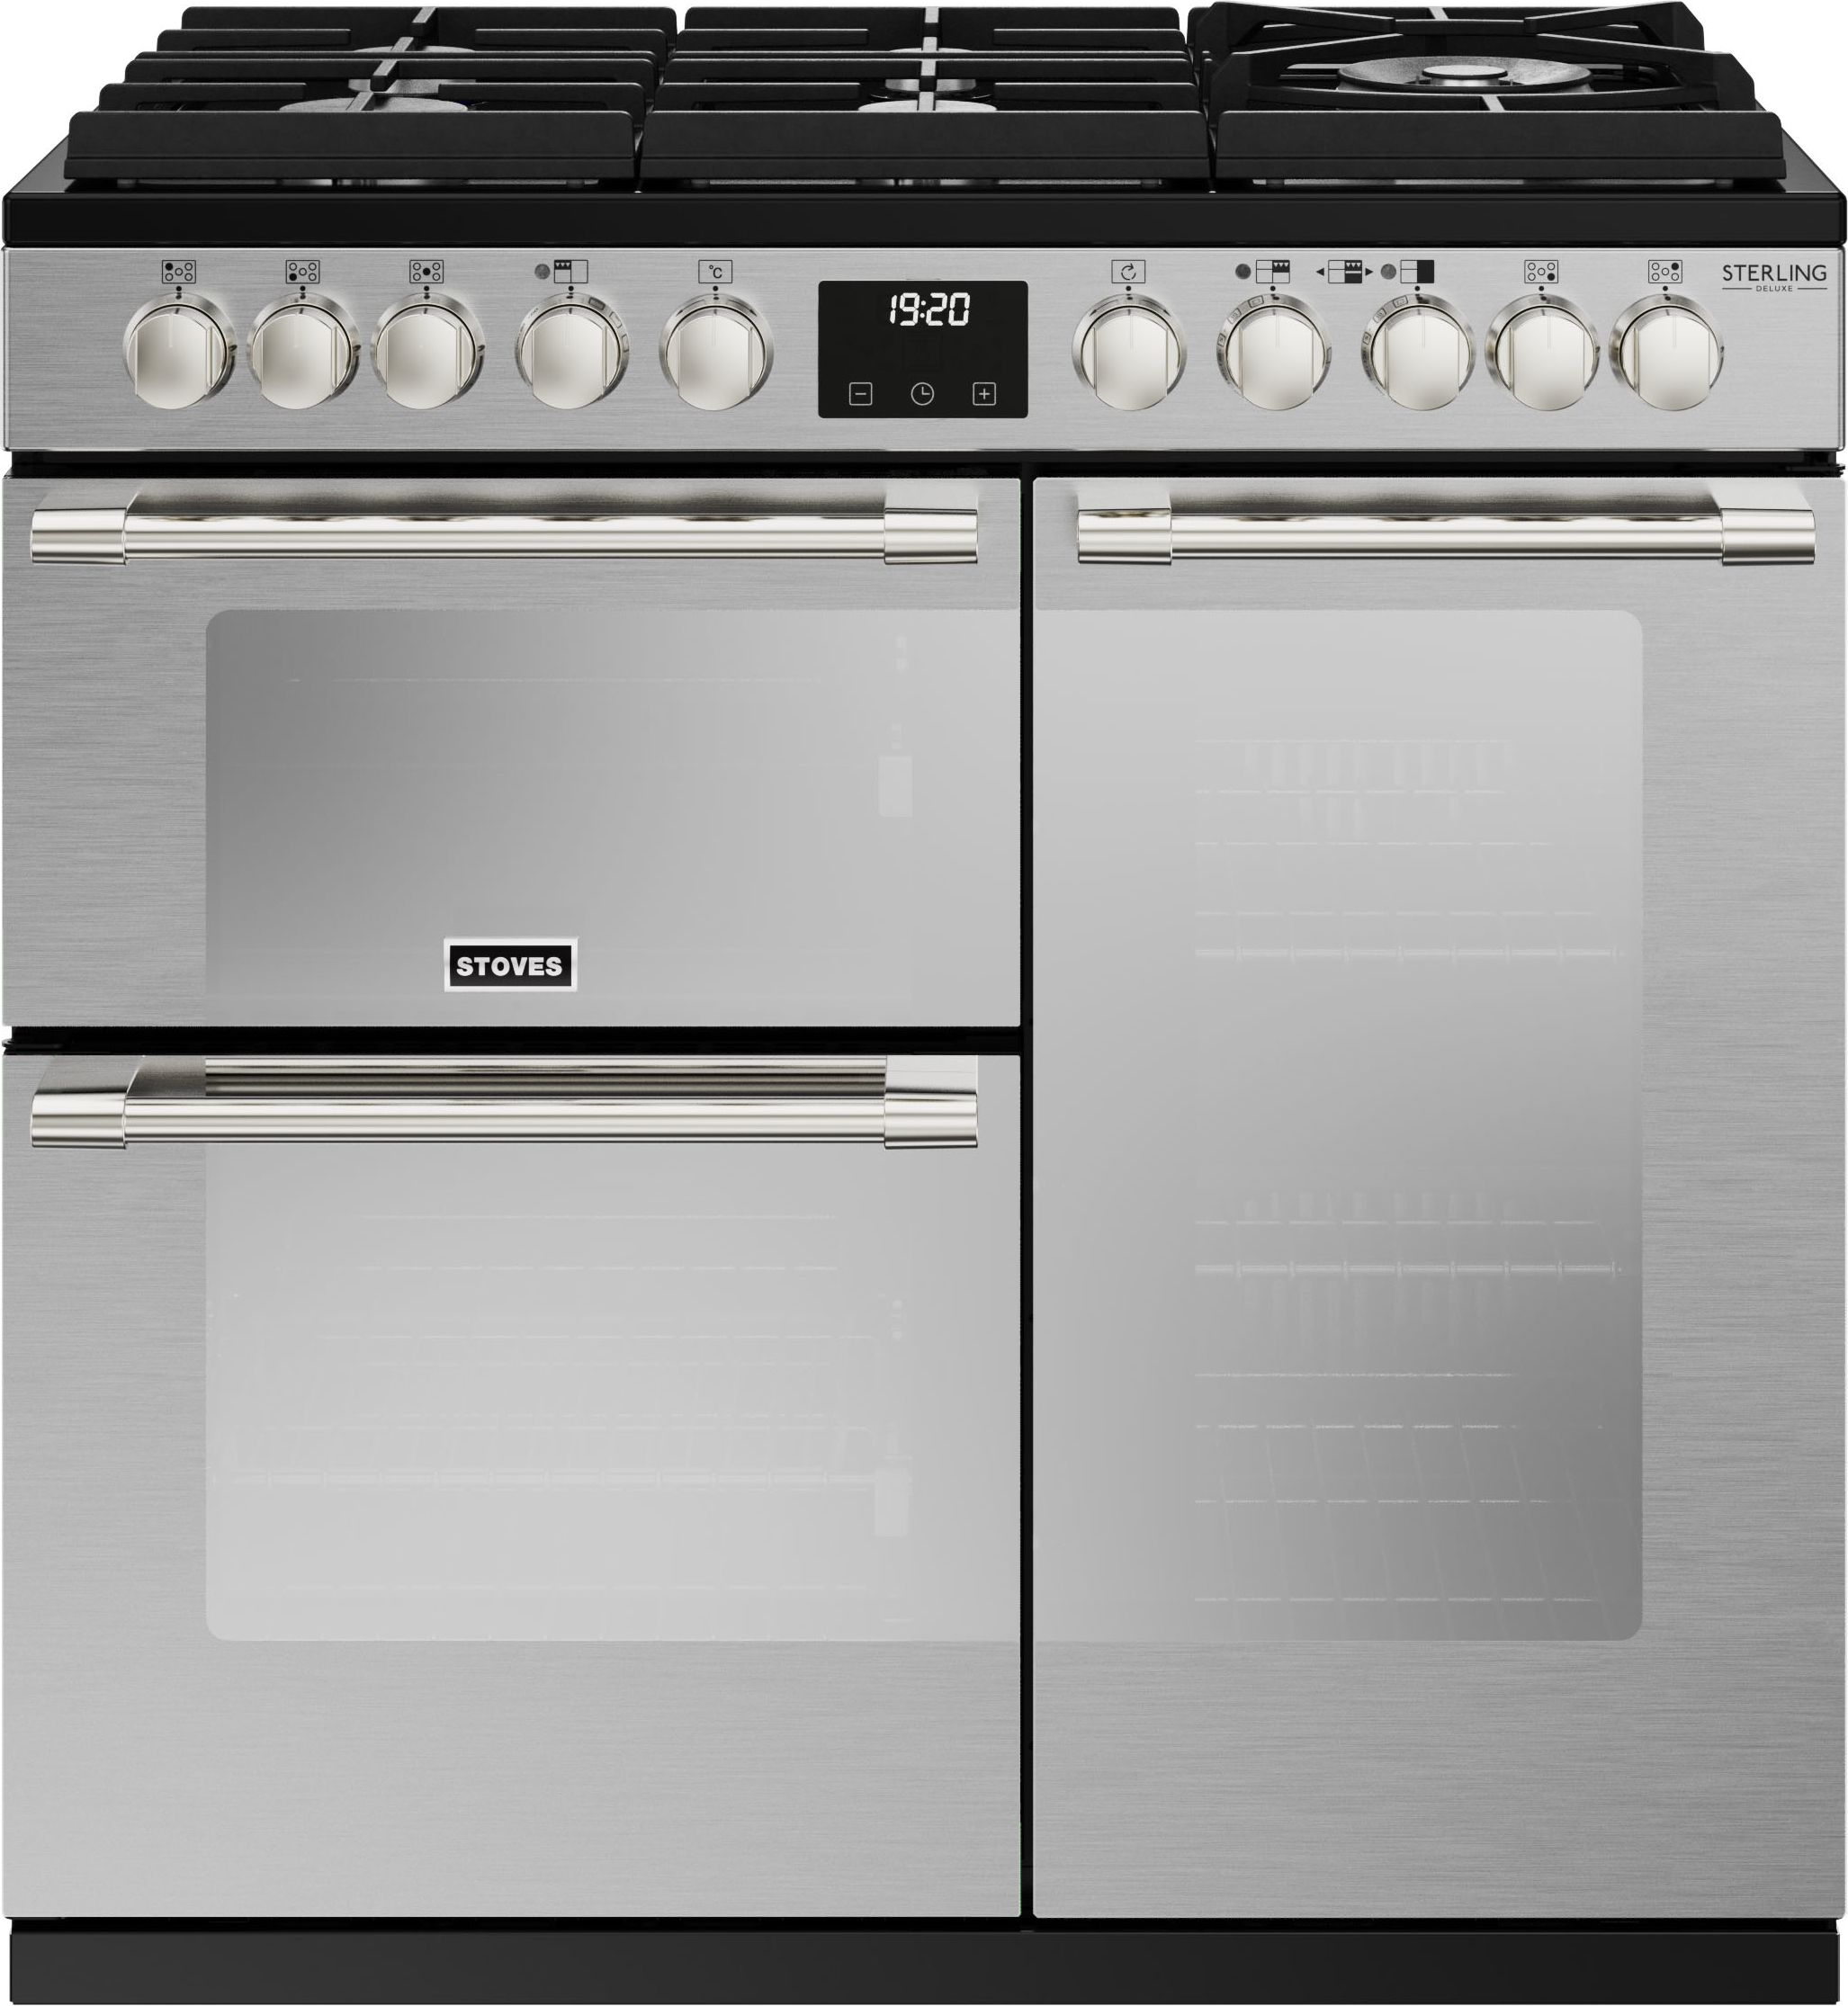 Stoves Sterling Deluxe ST DX STER D900DF GTG SS 90cm Dual Fuel Range Cooker - Stainless Steel - A/A/A Rated, Stainless Steel